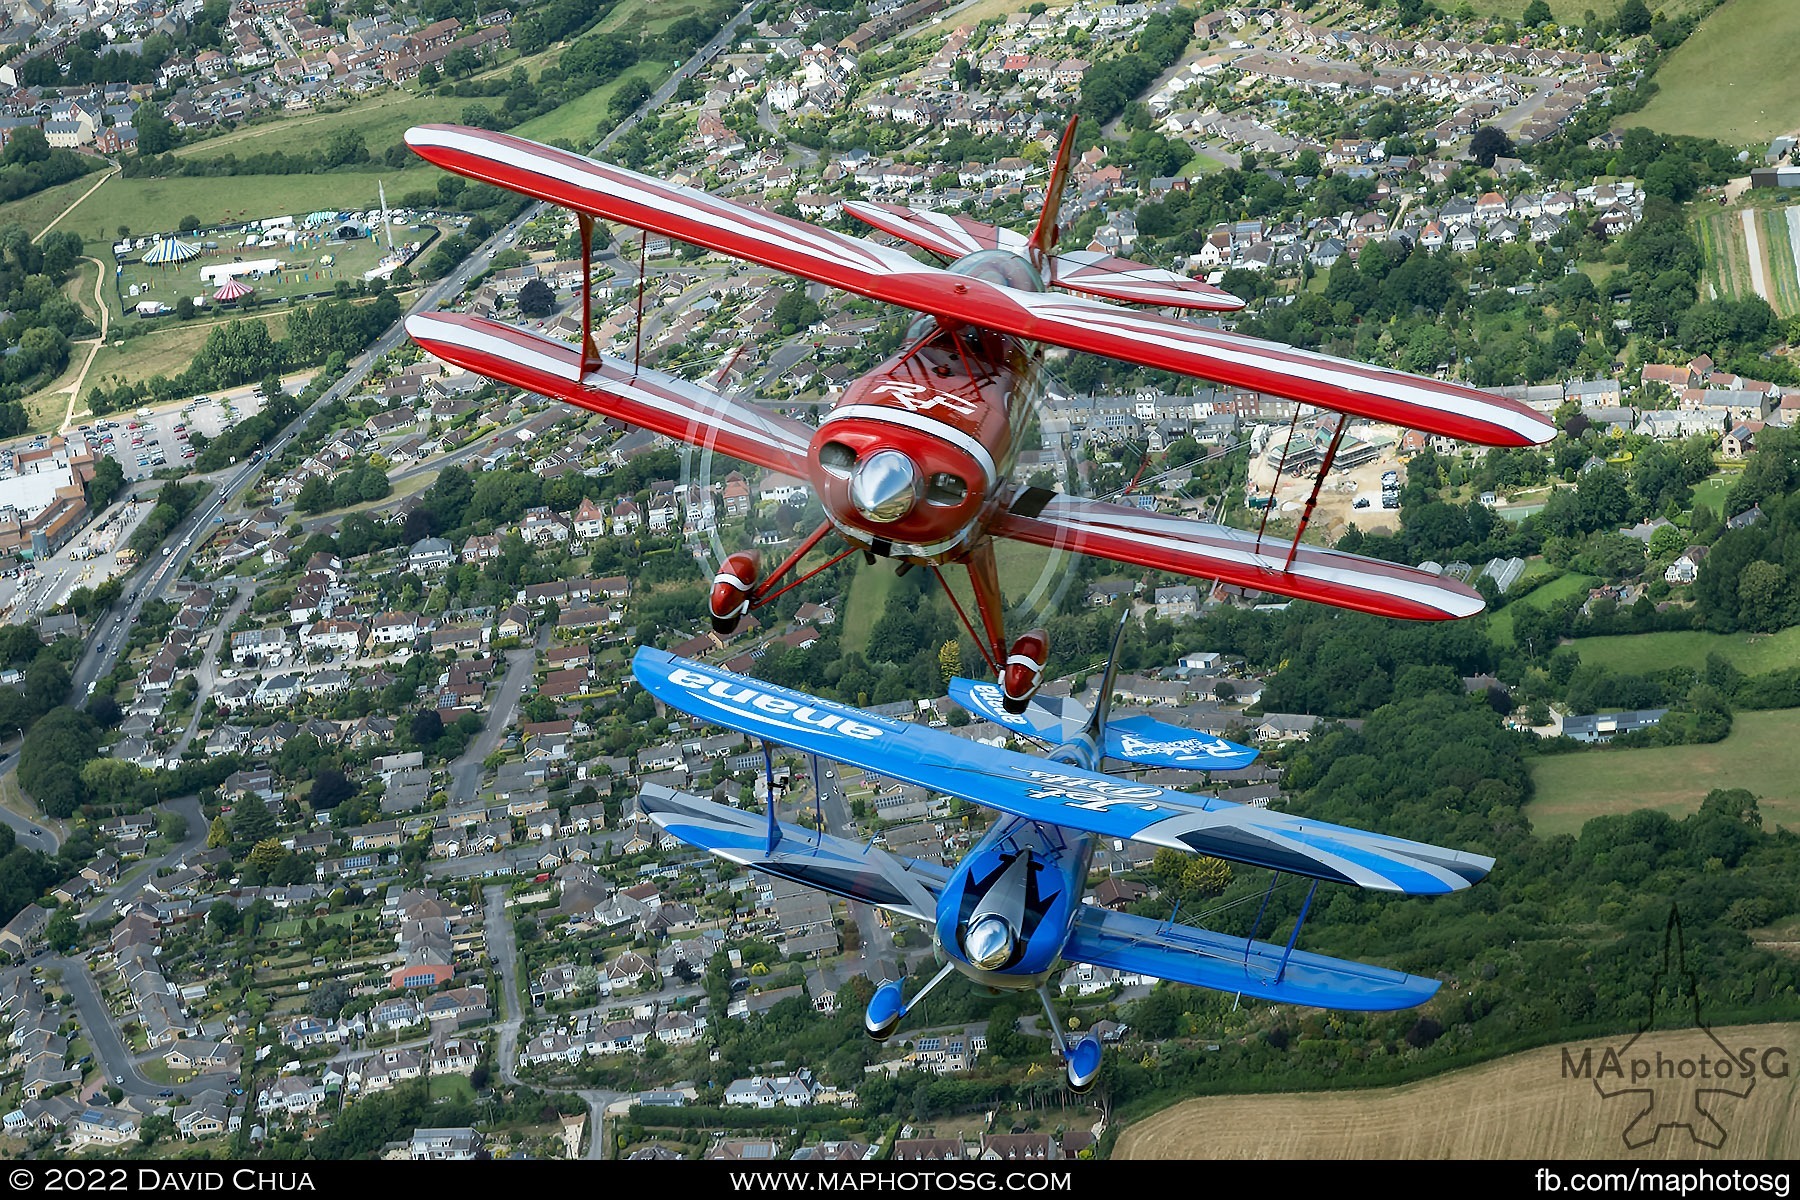 Pitts S-2S Muscle Biplane